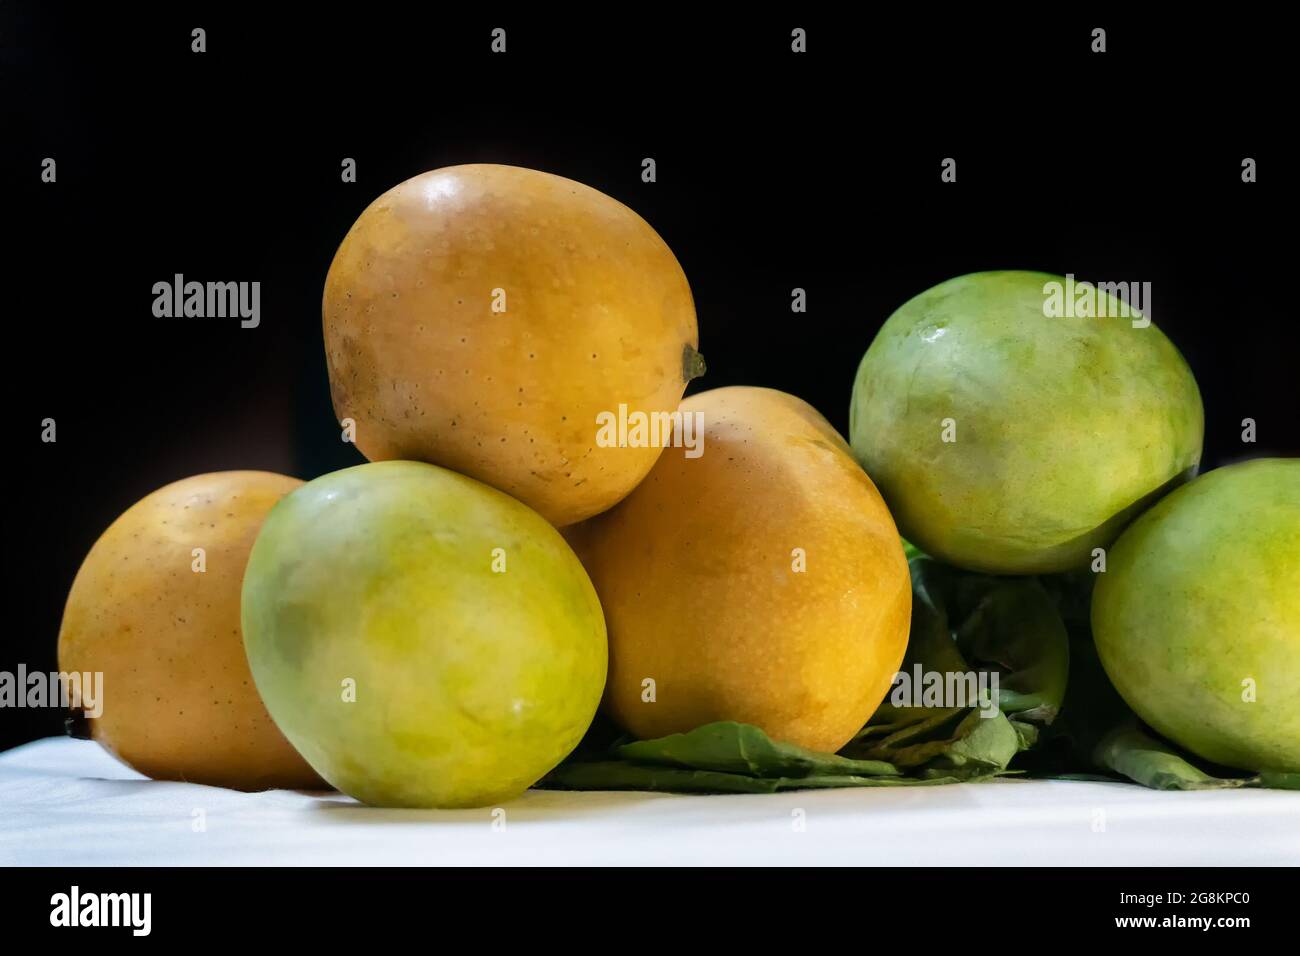 Mangoes, juicy stone fruits, from numerous species of tropical trees belonging to the flowering plant genus Mangifera, cultivated mostly for their edi Stock Photo